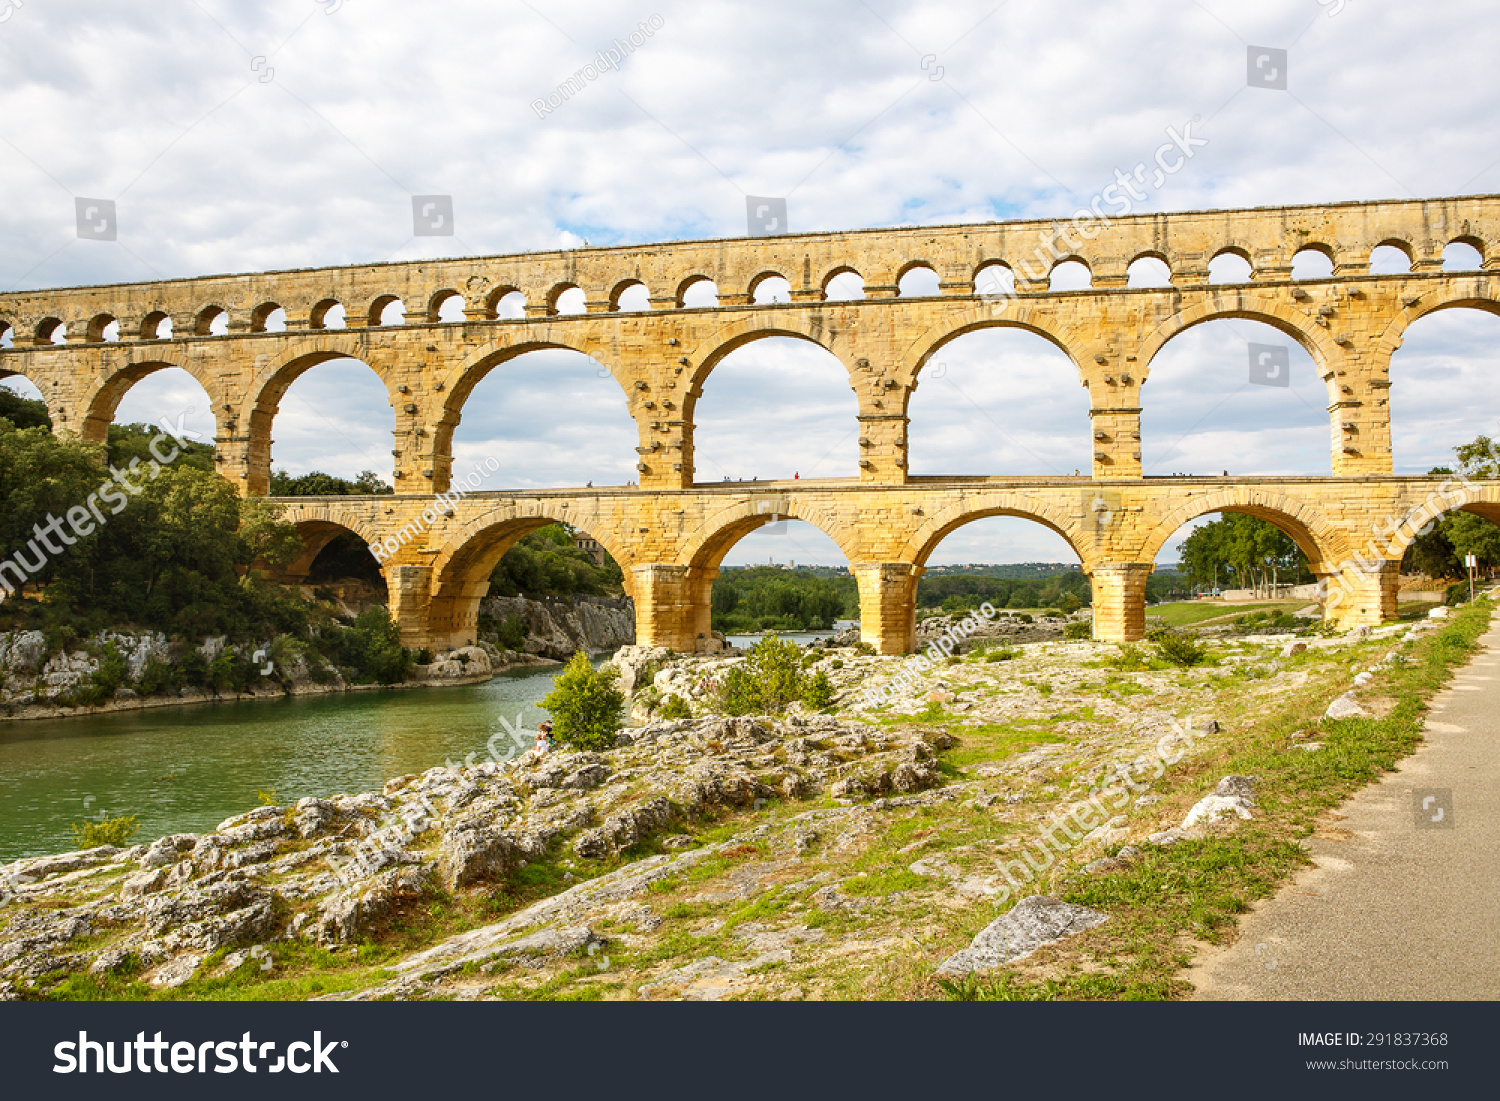 How Old Is The Aqueduct At Nimes 114